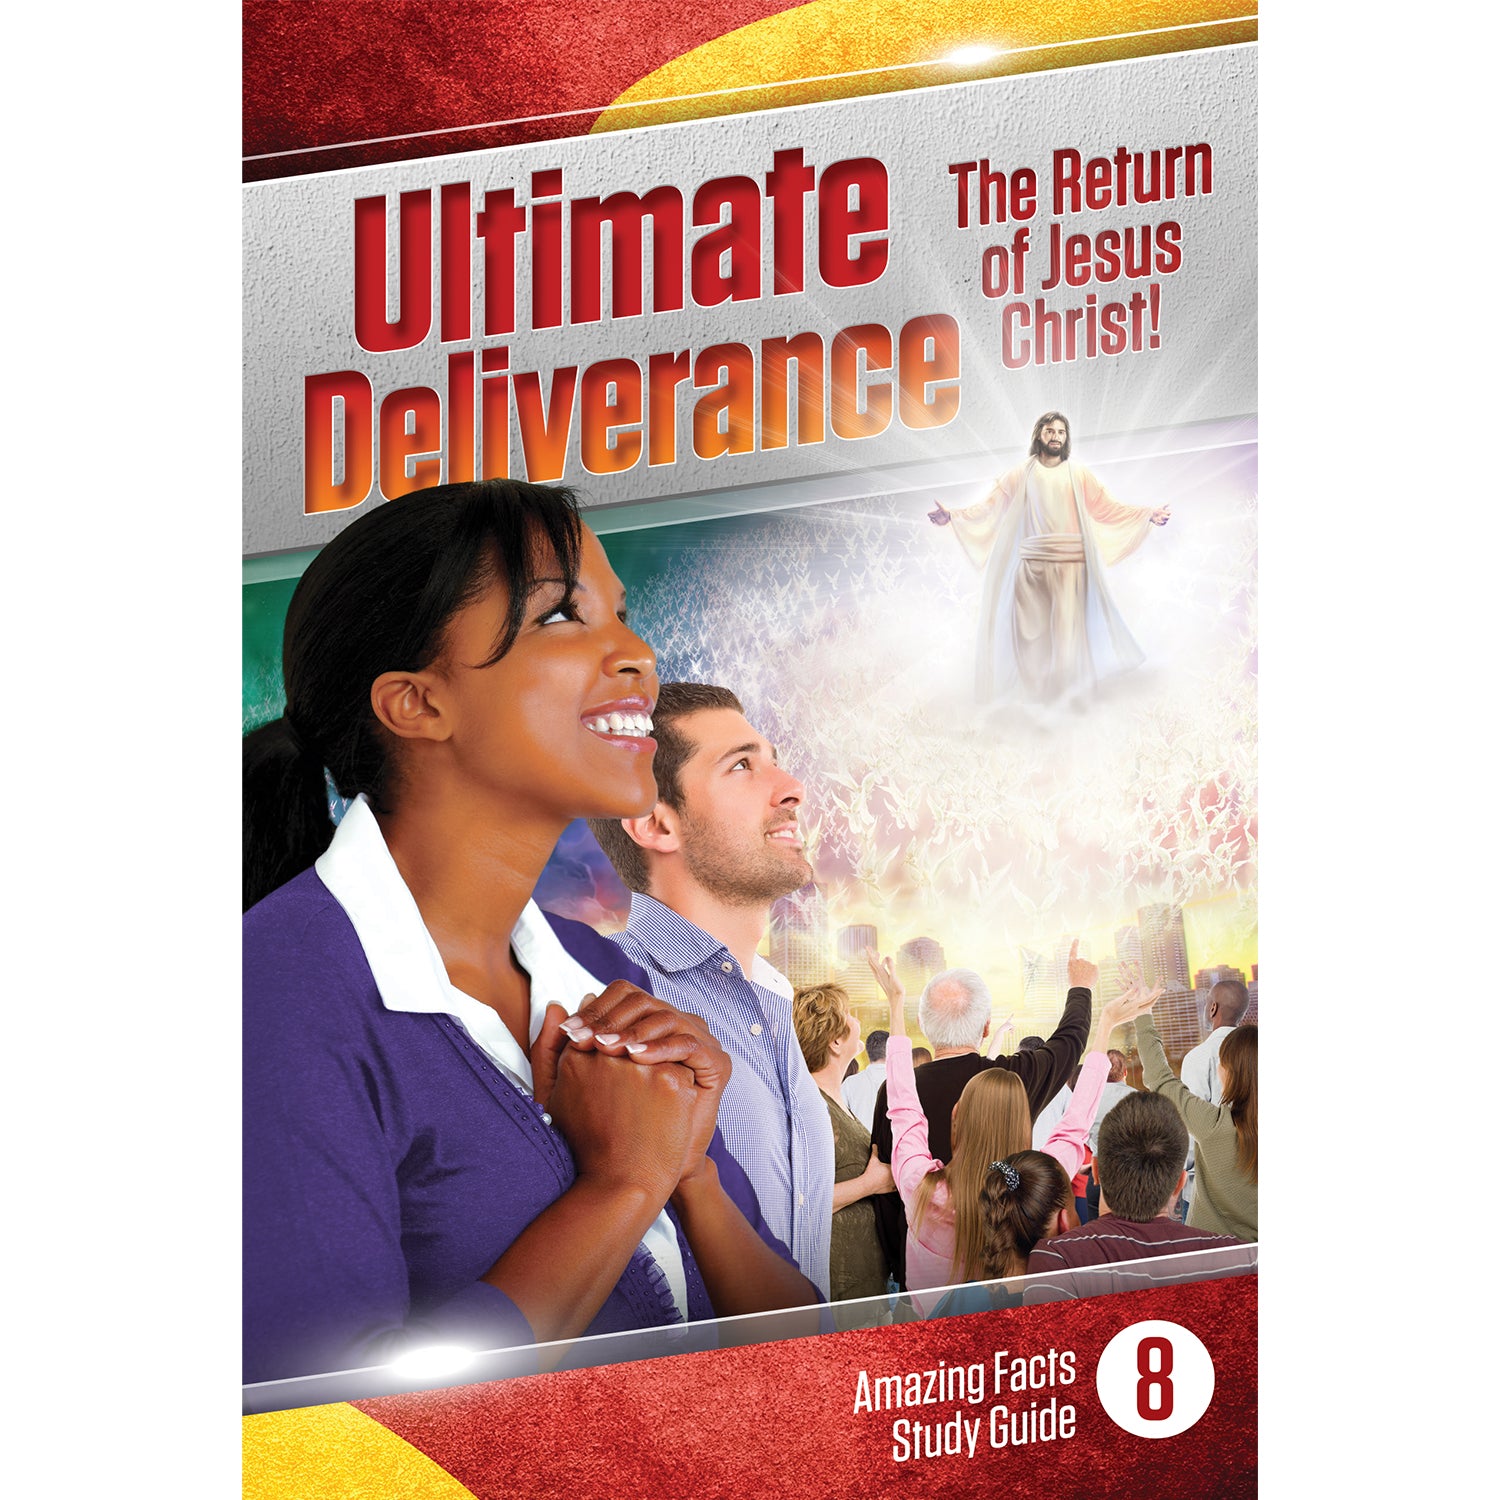 The Ultimate Deliverance by Bill May